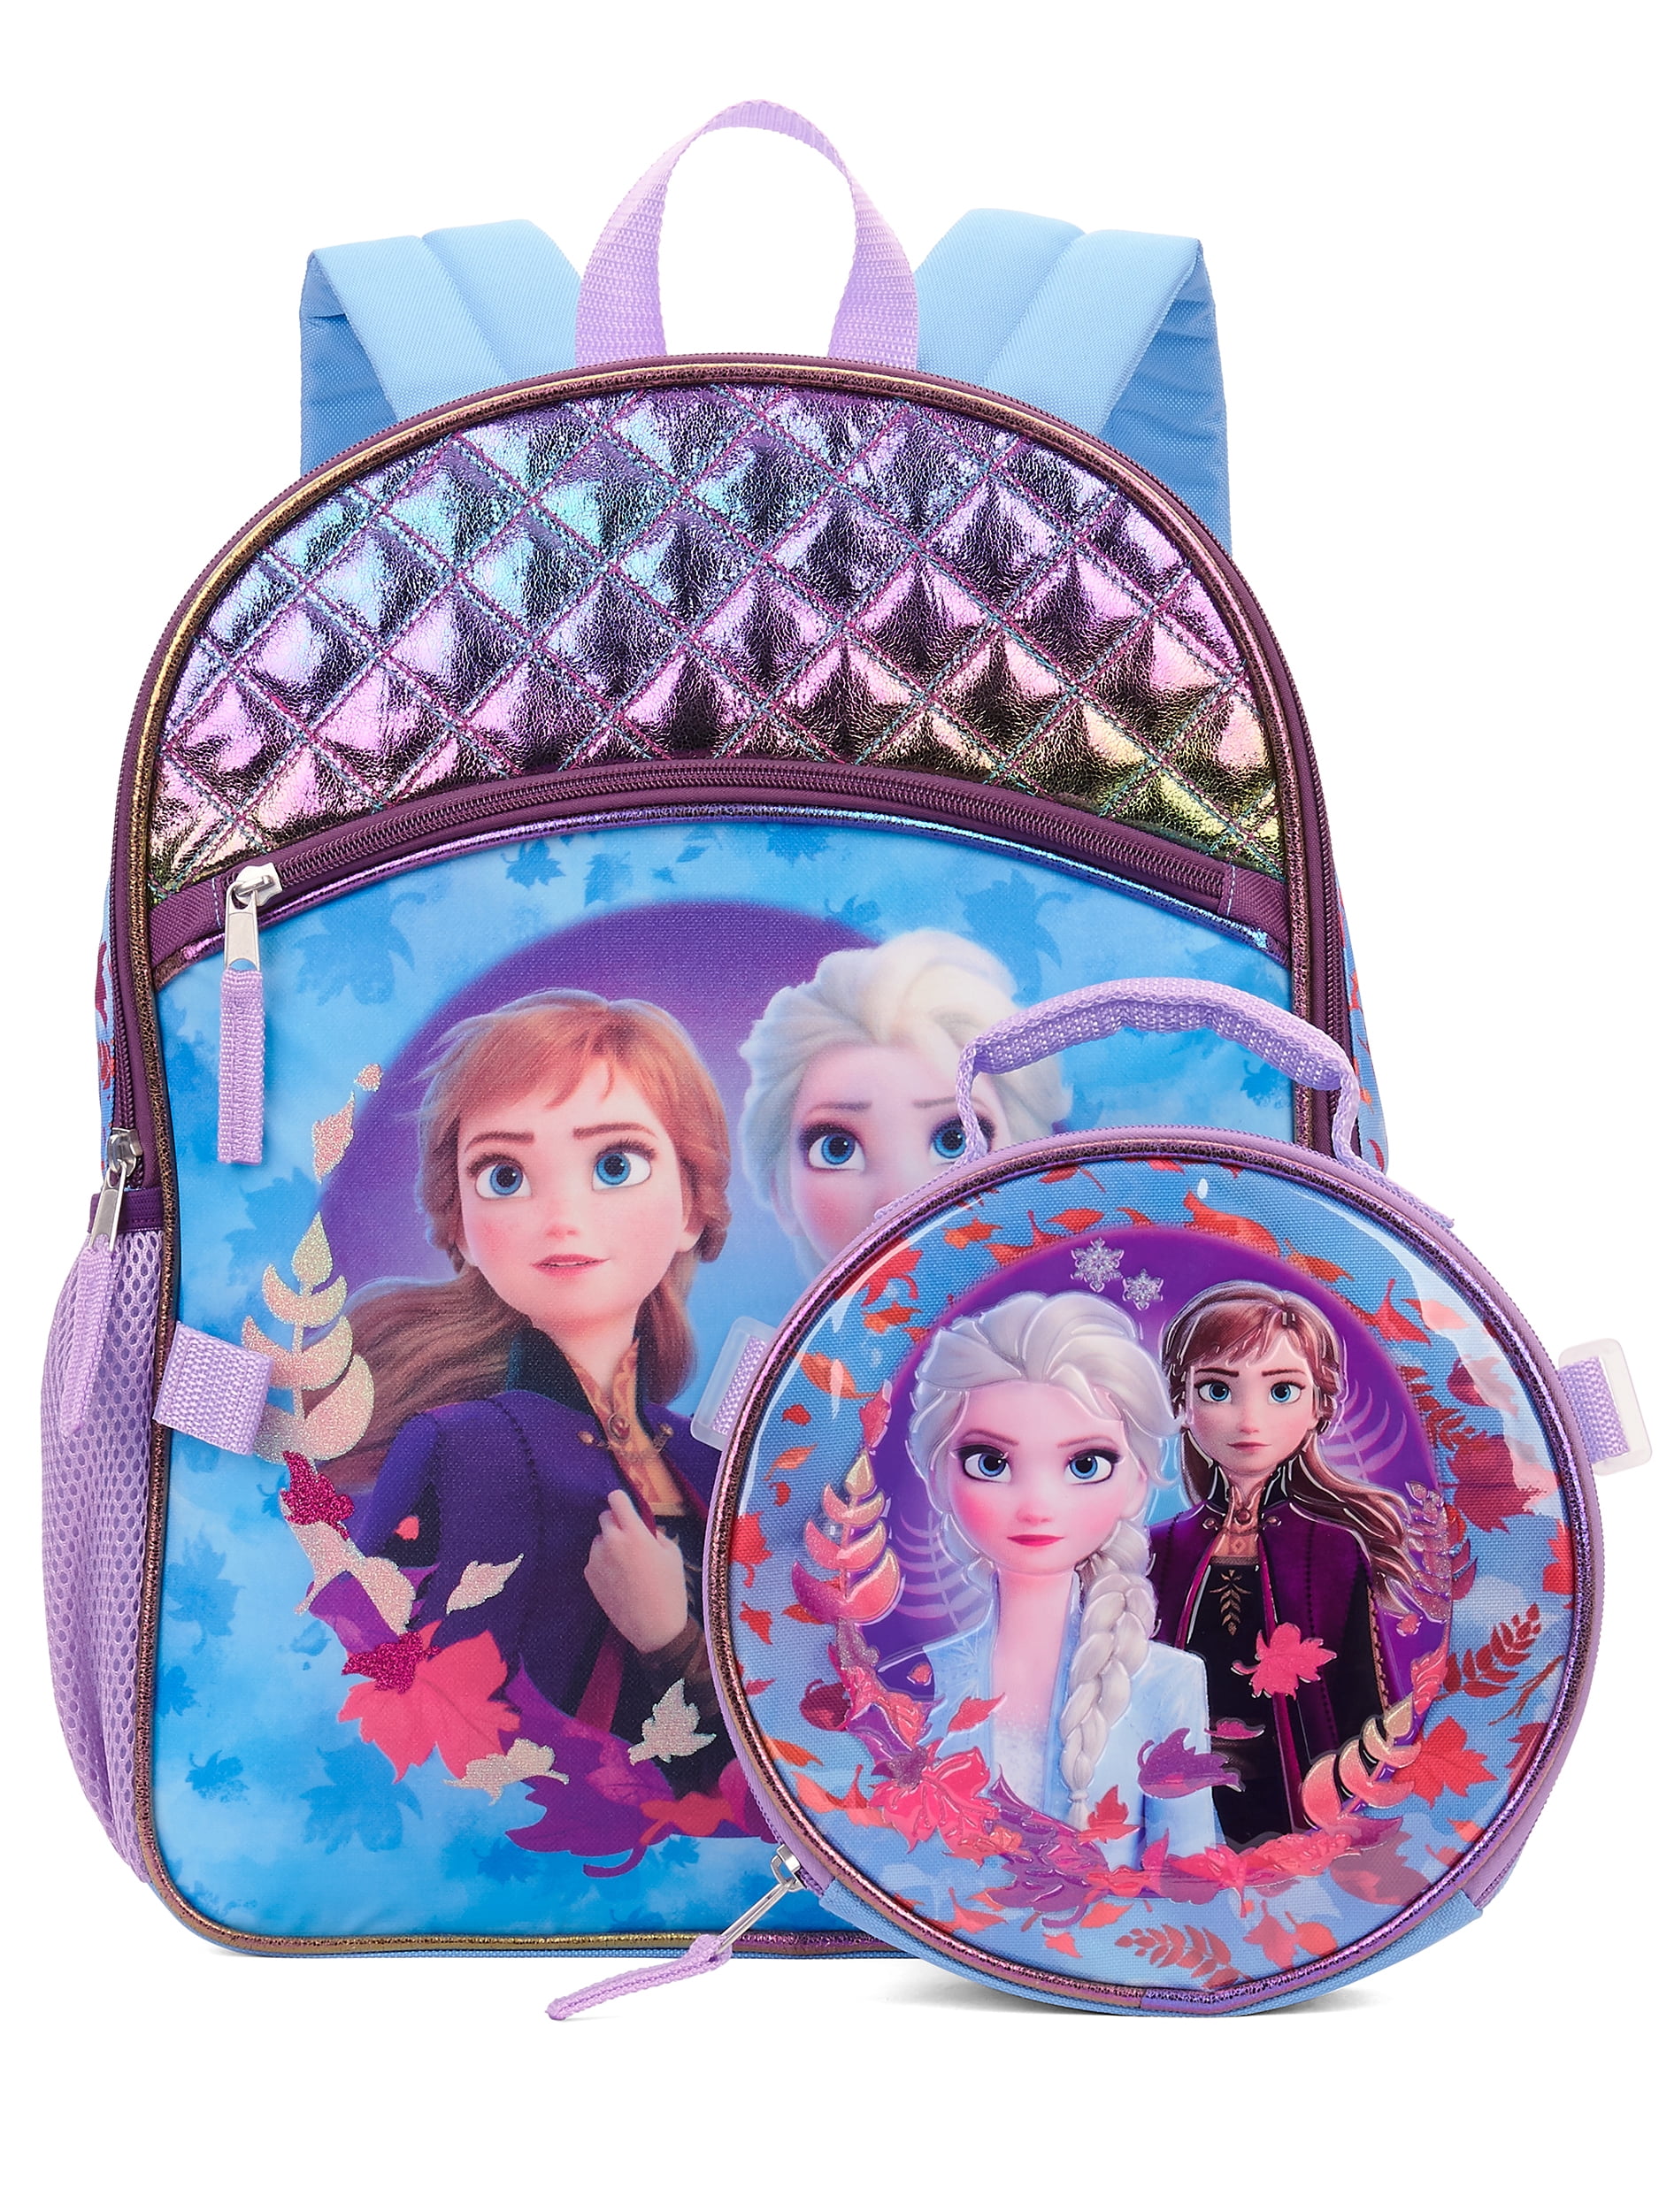 Disney Frozen Frozen 2 Elsa And Anna Backpack With Lunch Bag